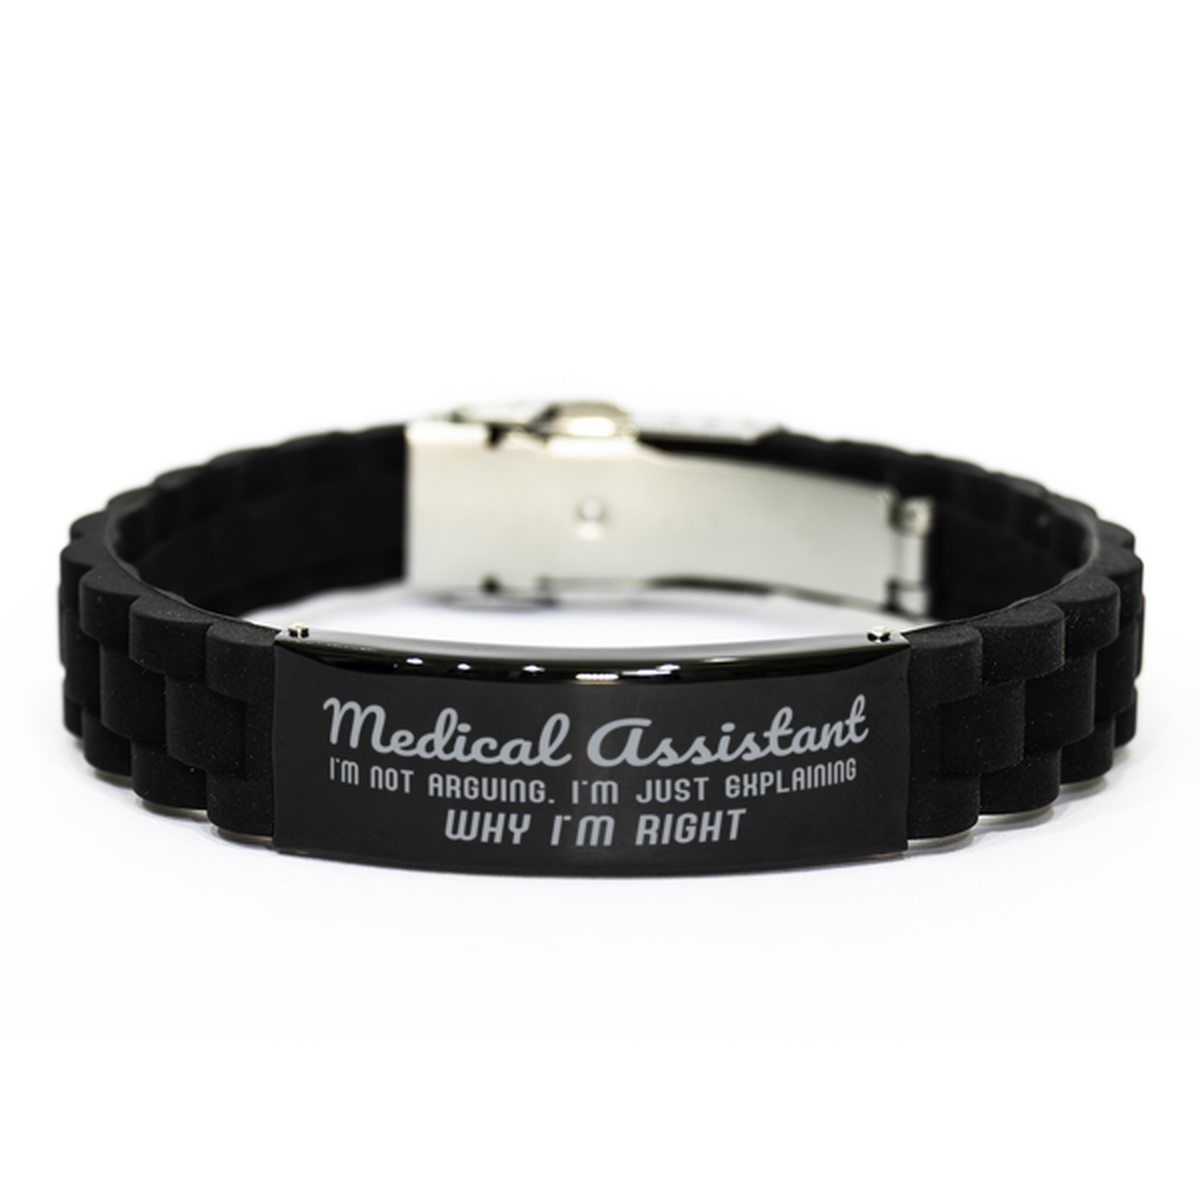 Medical Assistant I'm not Arguing. I'm Just Explaining Why I'm RIGHT Black Glidelock Clasp Bracelet, Funny Saying Quote Medical Assistant Gifts For Medical Assistant Graduation Birthday Christmas Gifts for Men Women Coworker